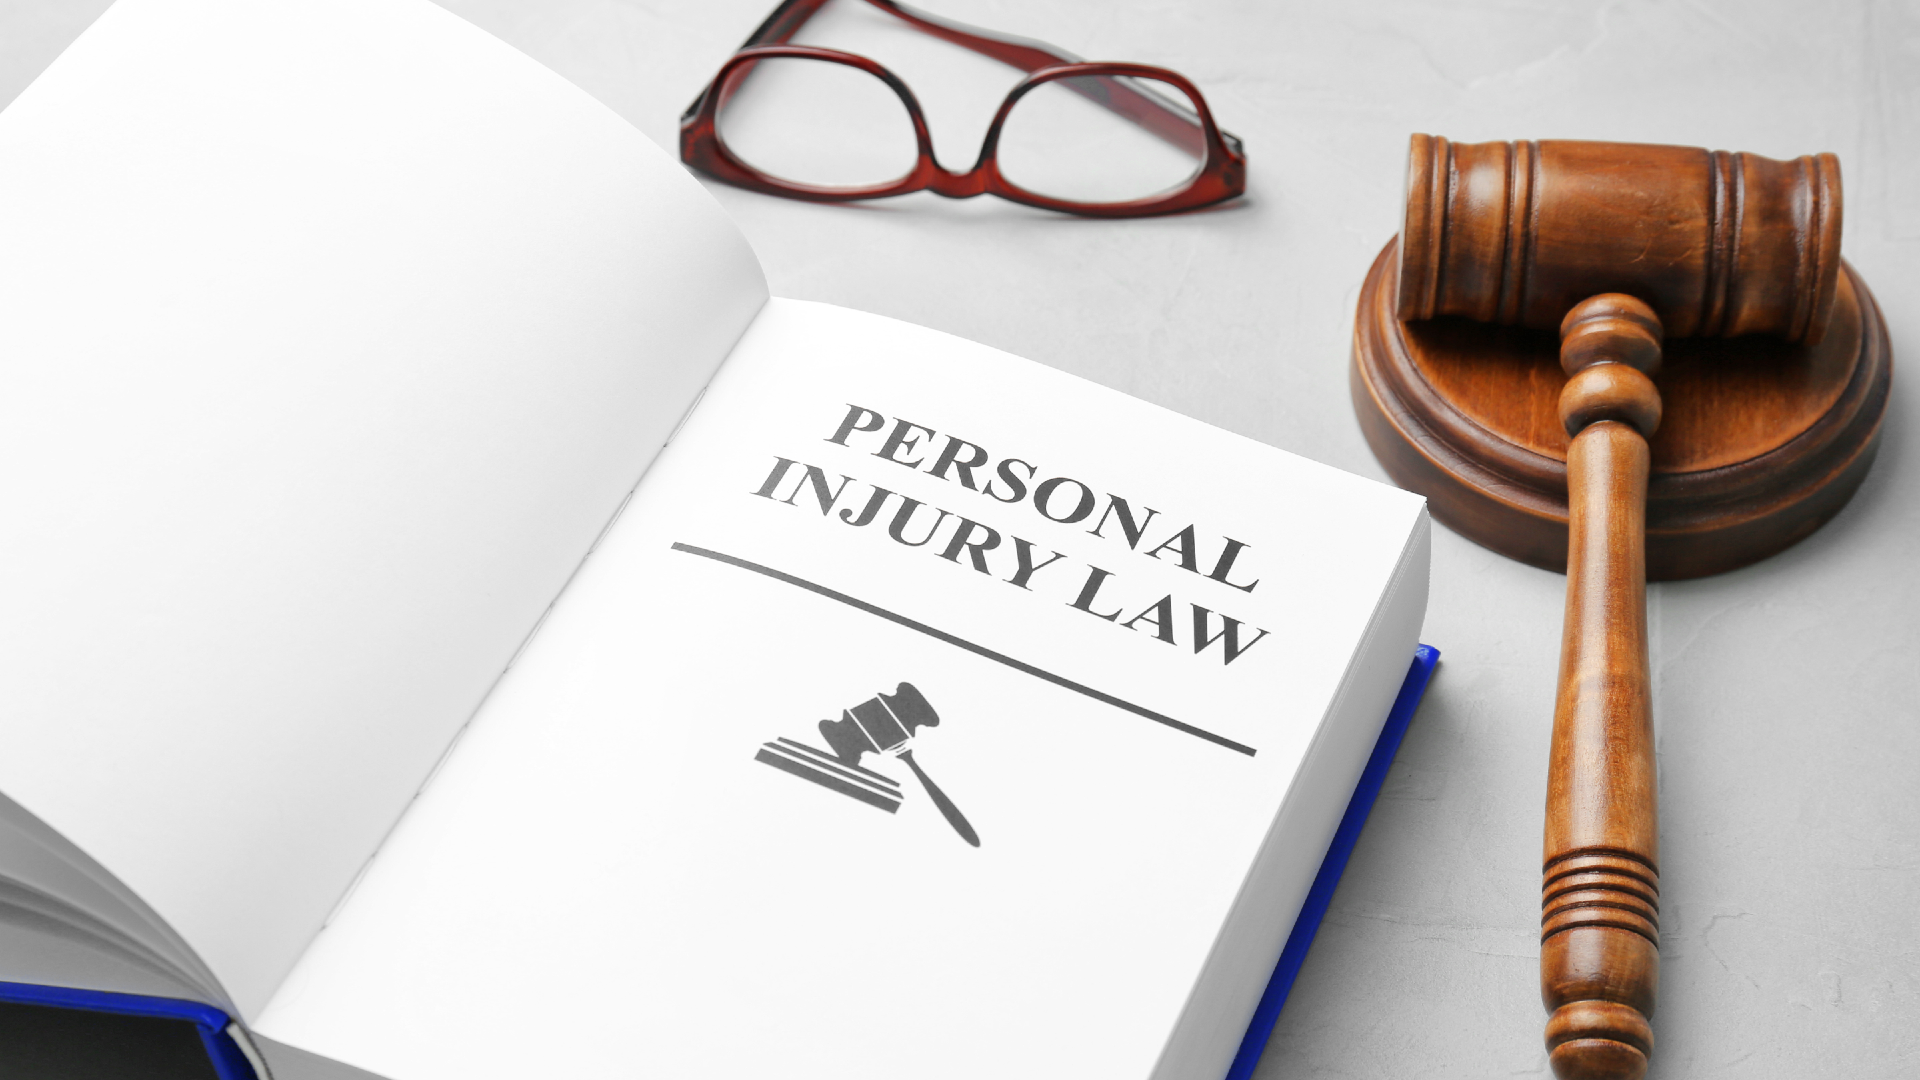 A personal injury law book sitting next to a gavel and a pair of glasses